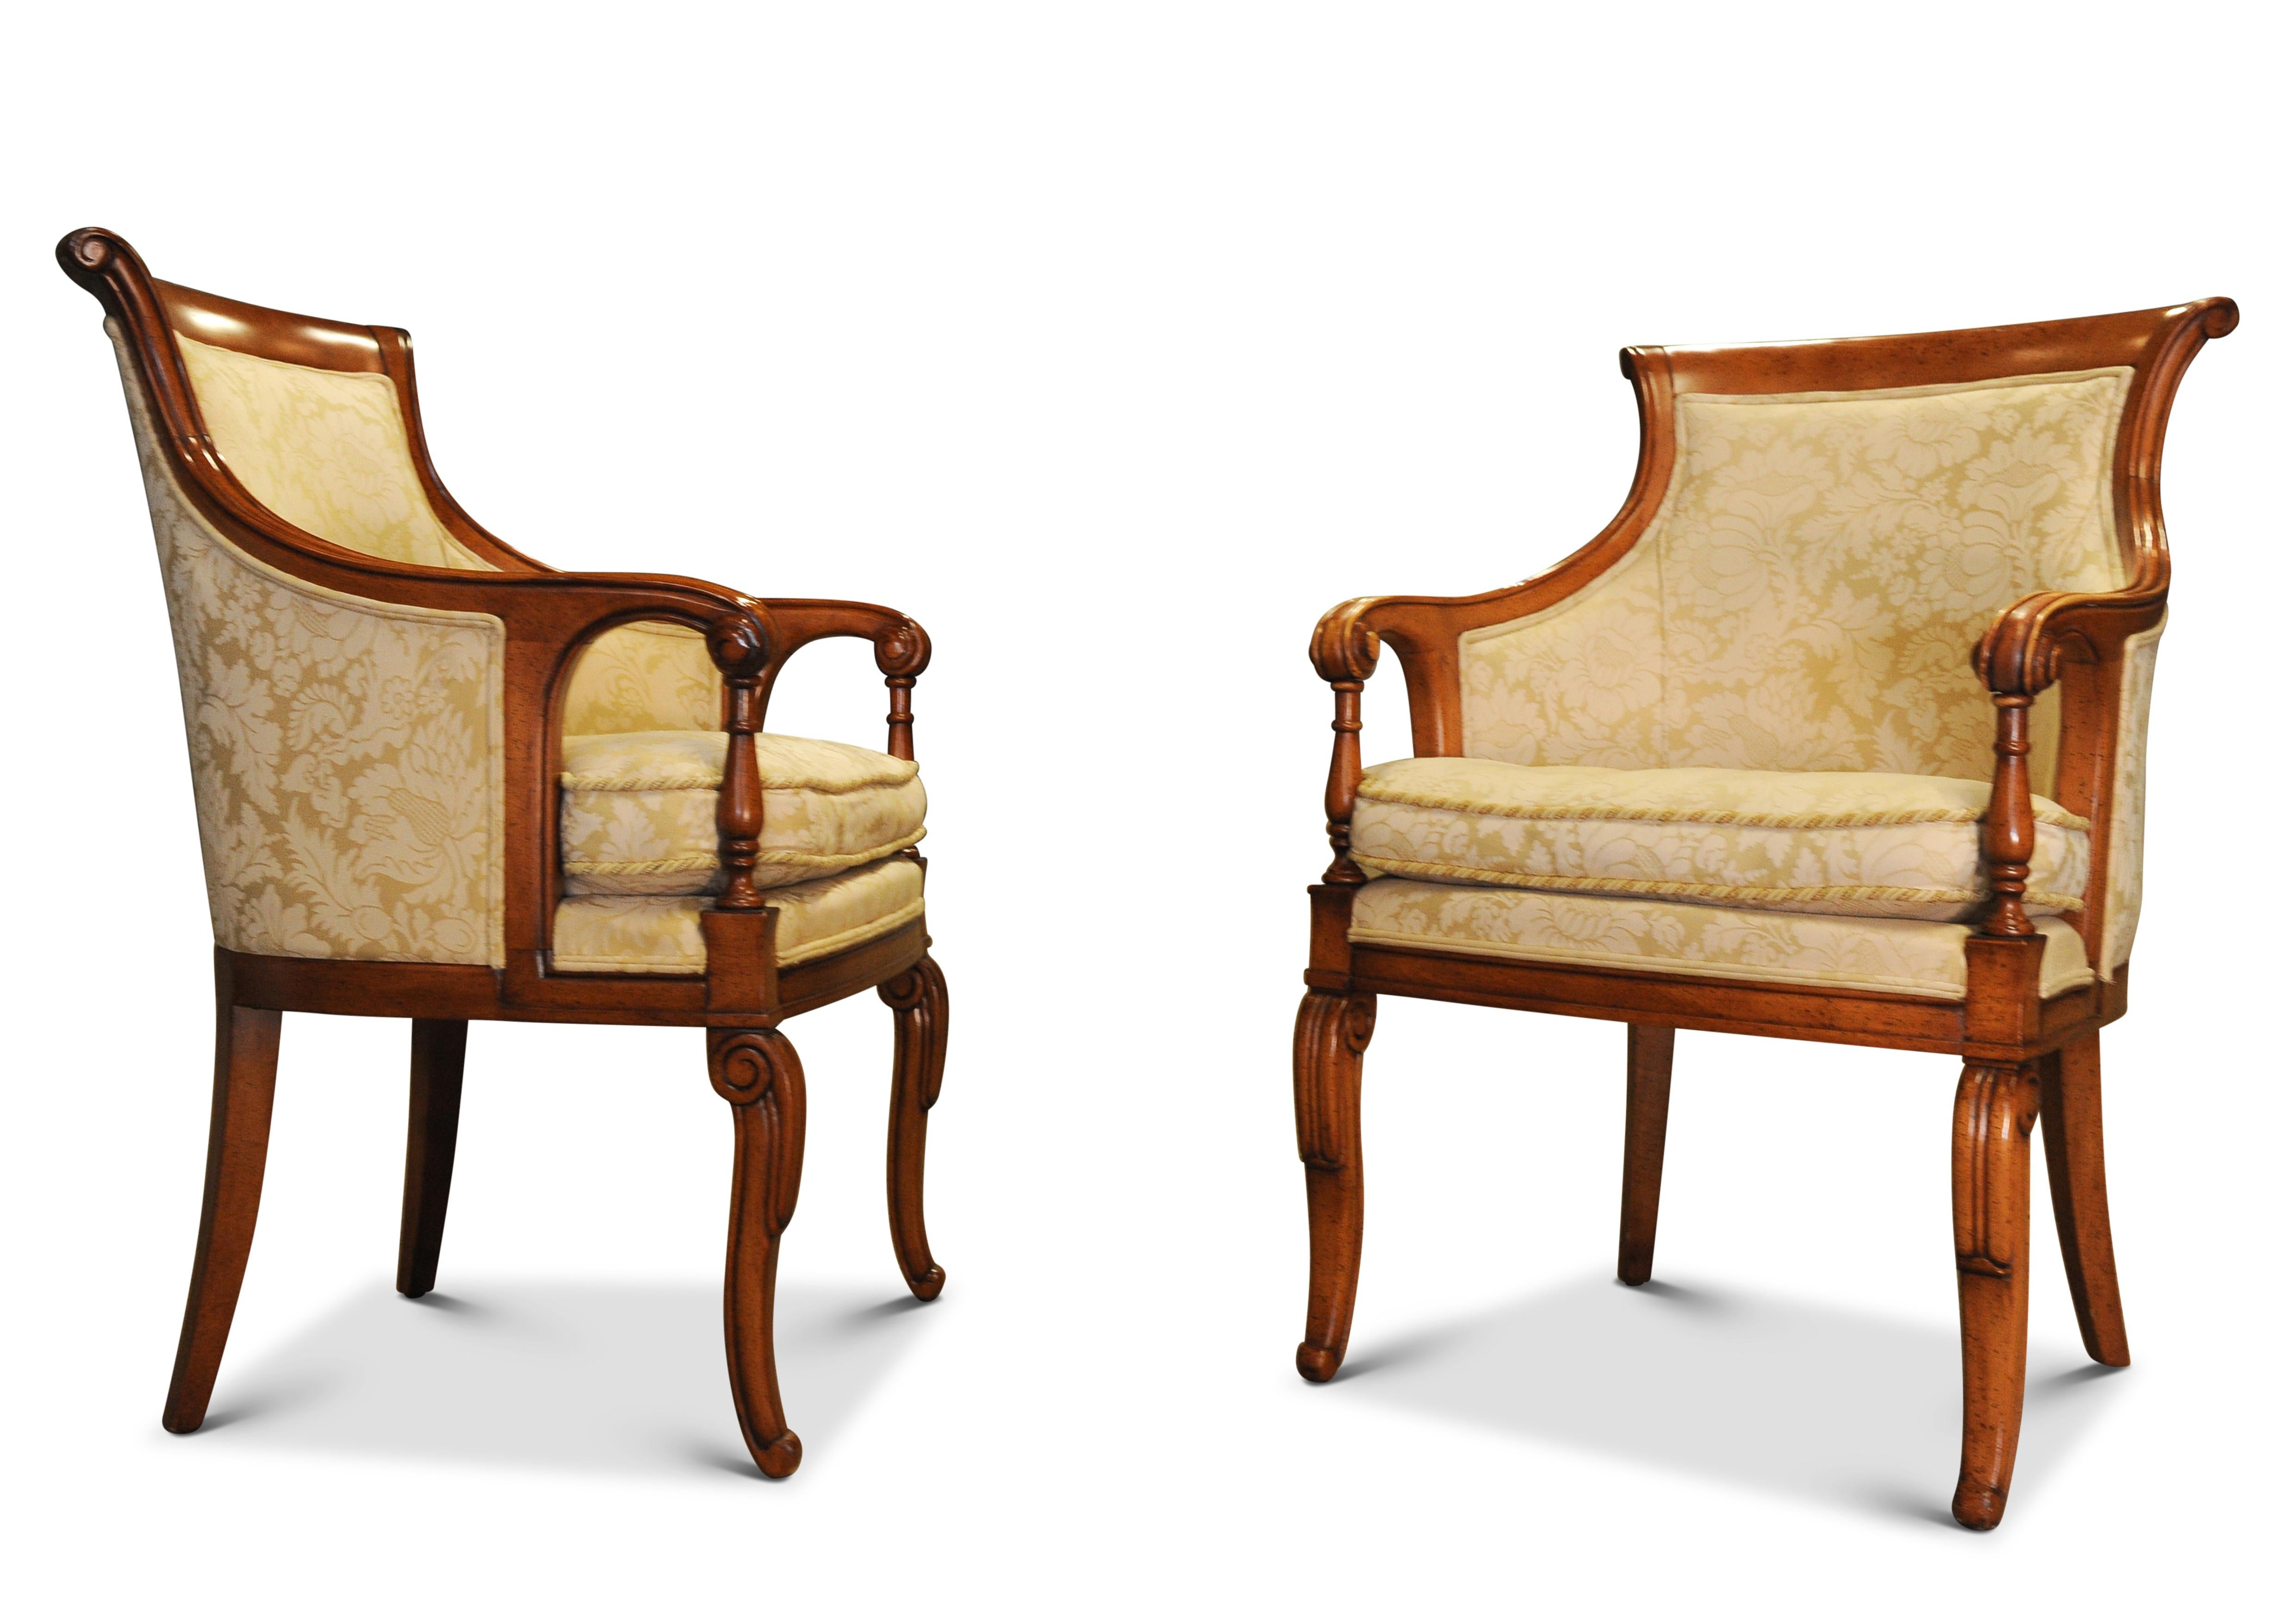 Elegant Pair of William IV Design Bergere Armchairs With Cream Damask Upholstery In Good Condition For Sale In High Wycombe, GB